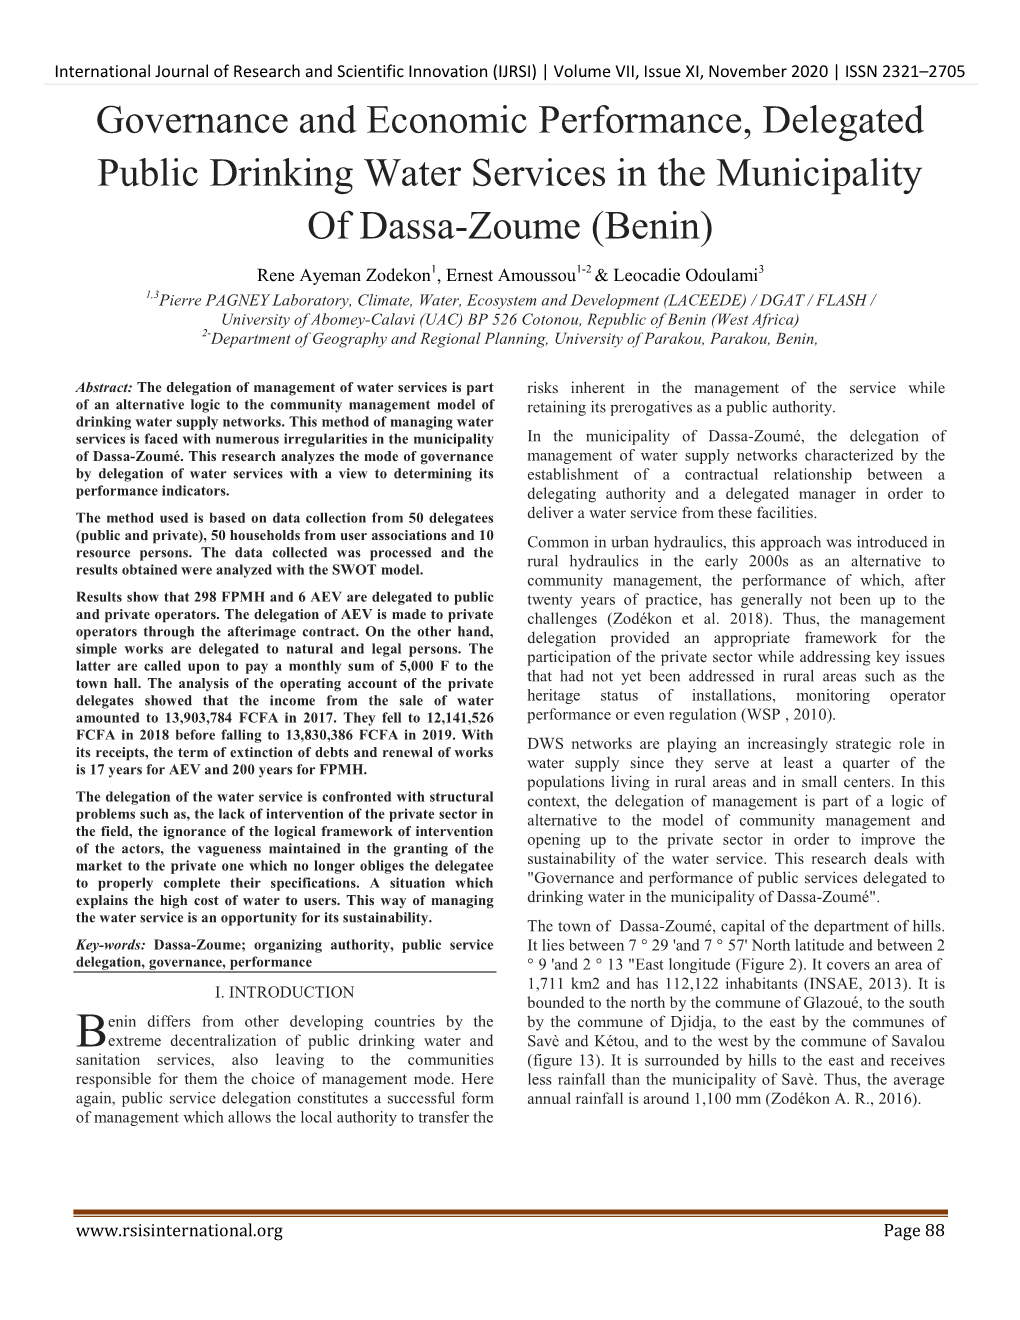 Governance and Economic Performance, Delegated Public Drinking Water Services in the Municipality of Dassa-Zoume (Benin)